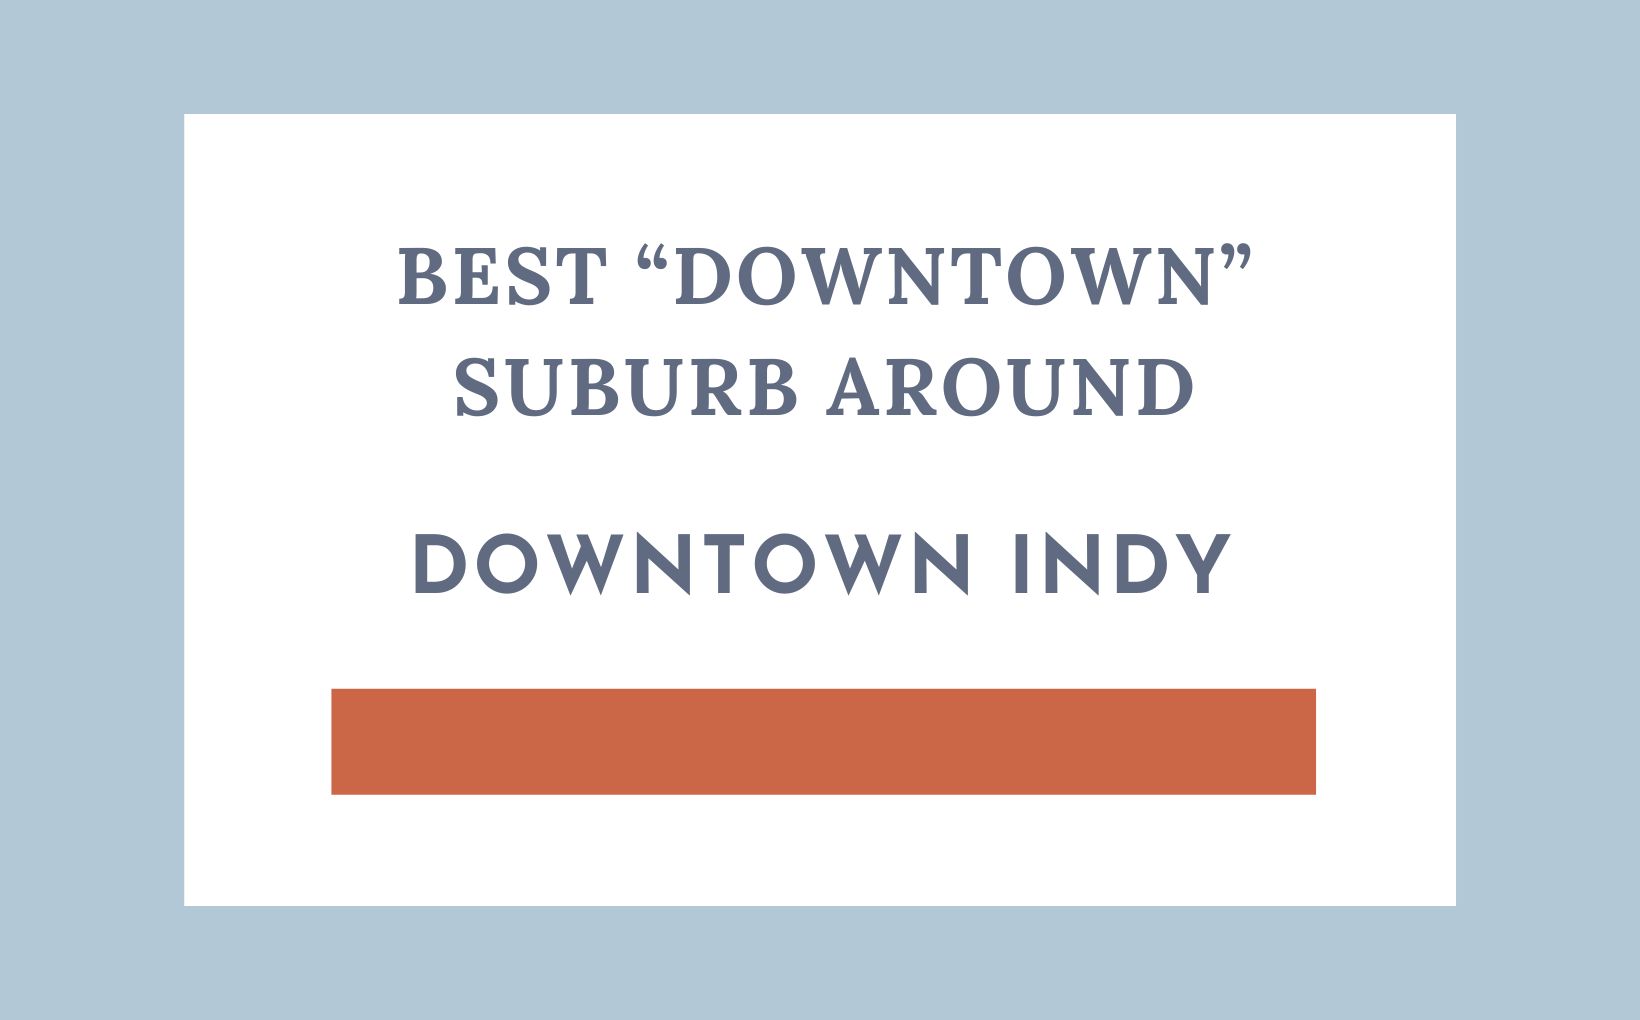 Best Downtown Suburbs of Indy feature image